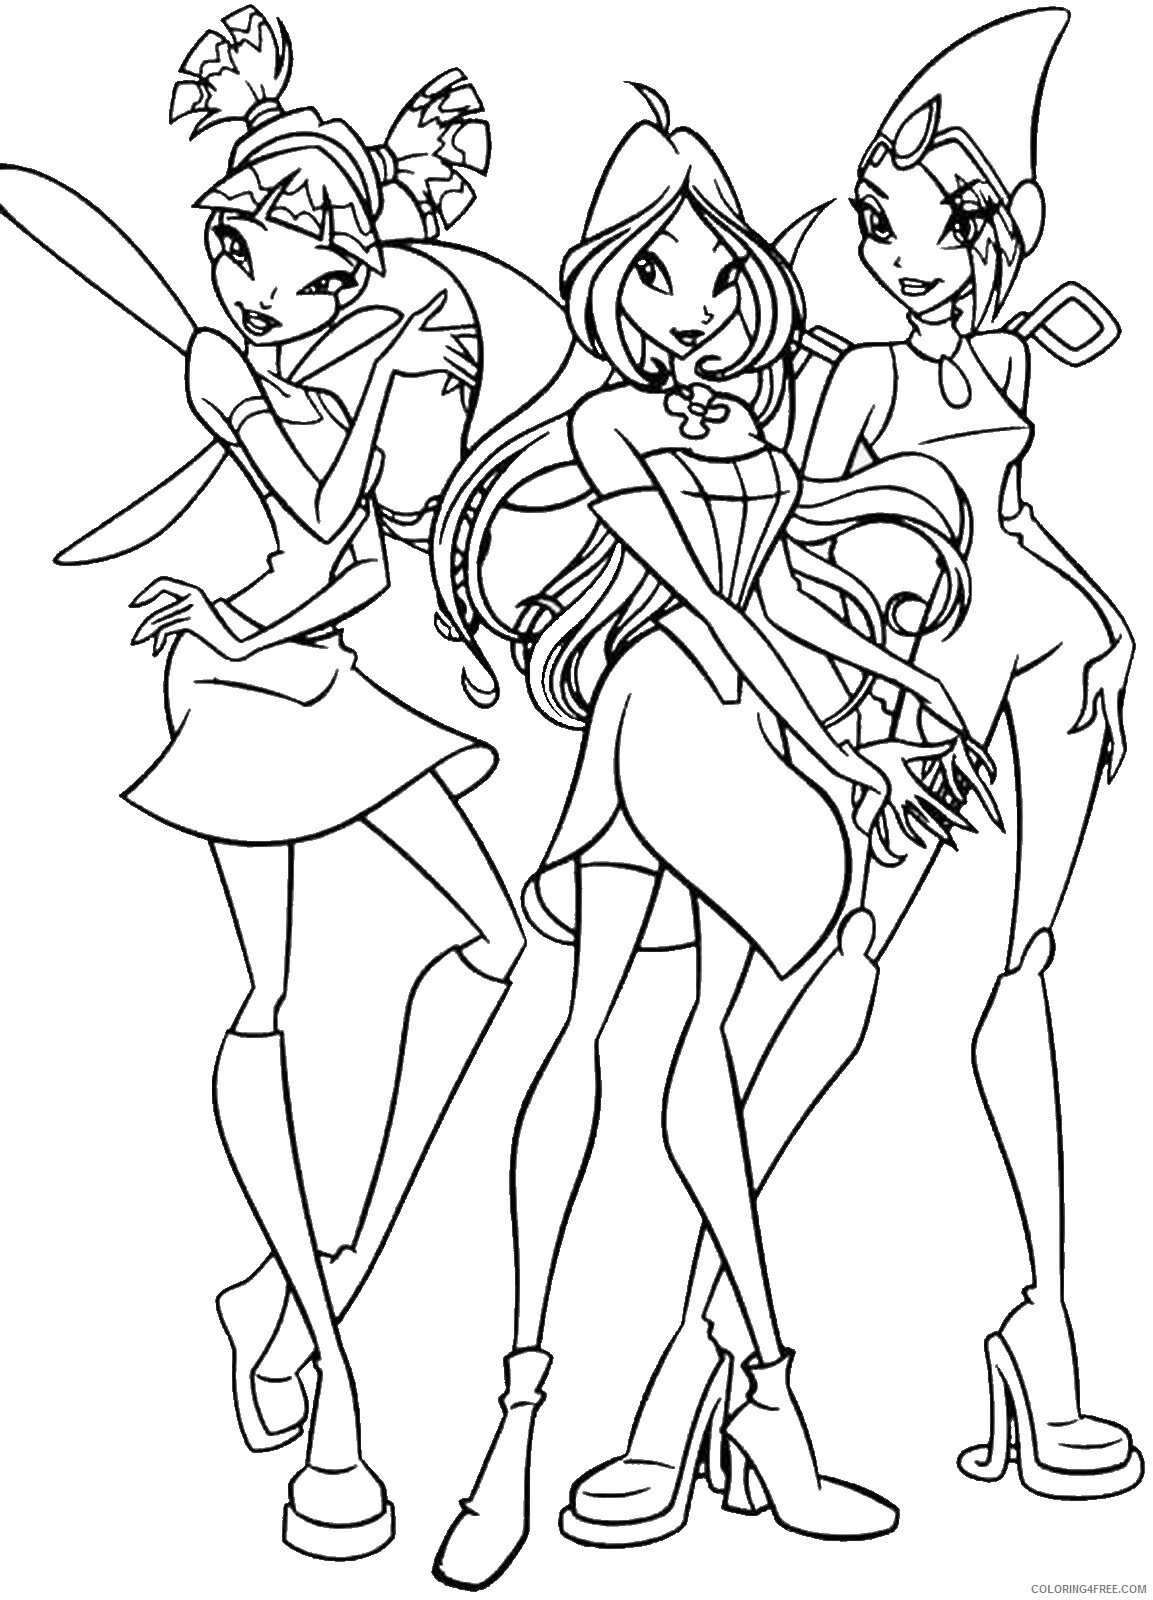 Winx Coloring Pages TV Film winx_cl_22 Printable 2020 11384 Coloring4free